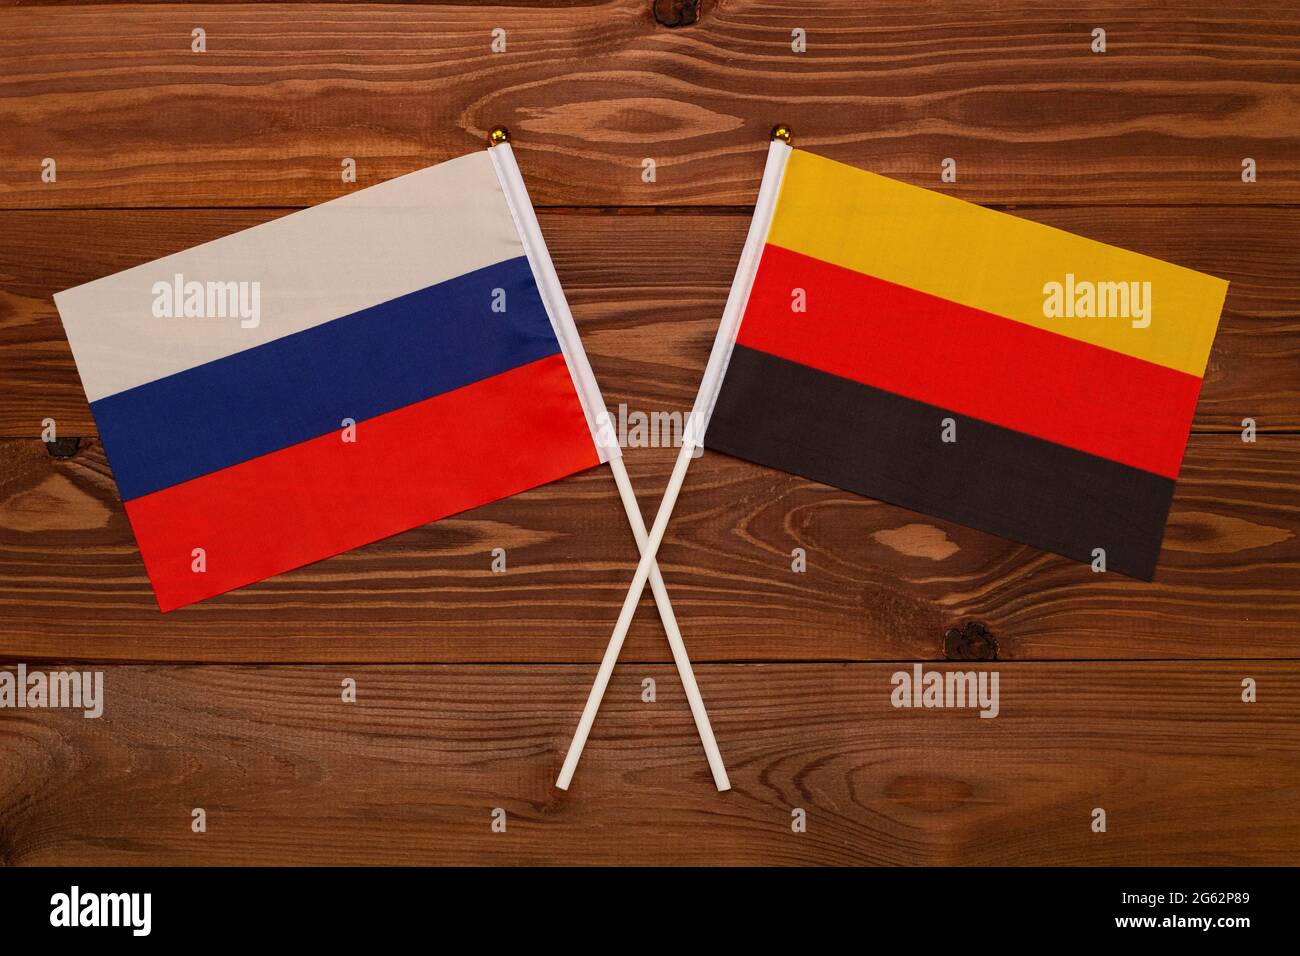 Flag of Russia and flag of Germany crossed with each other. The image illustrates the relationship between countries. Photography for video news on TV Stock Photo